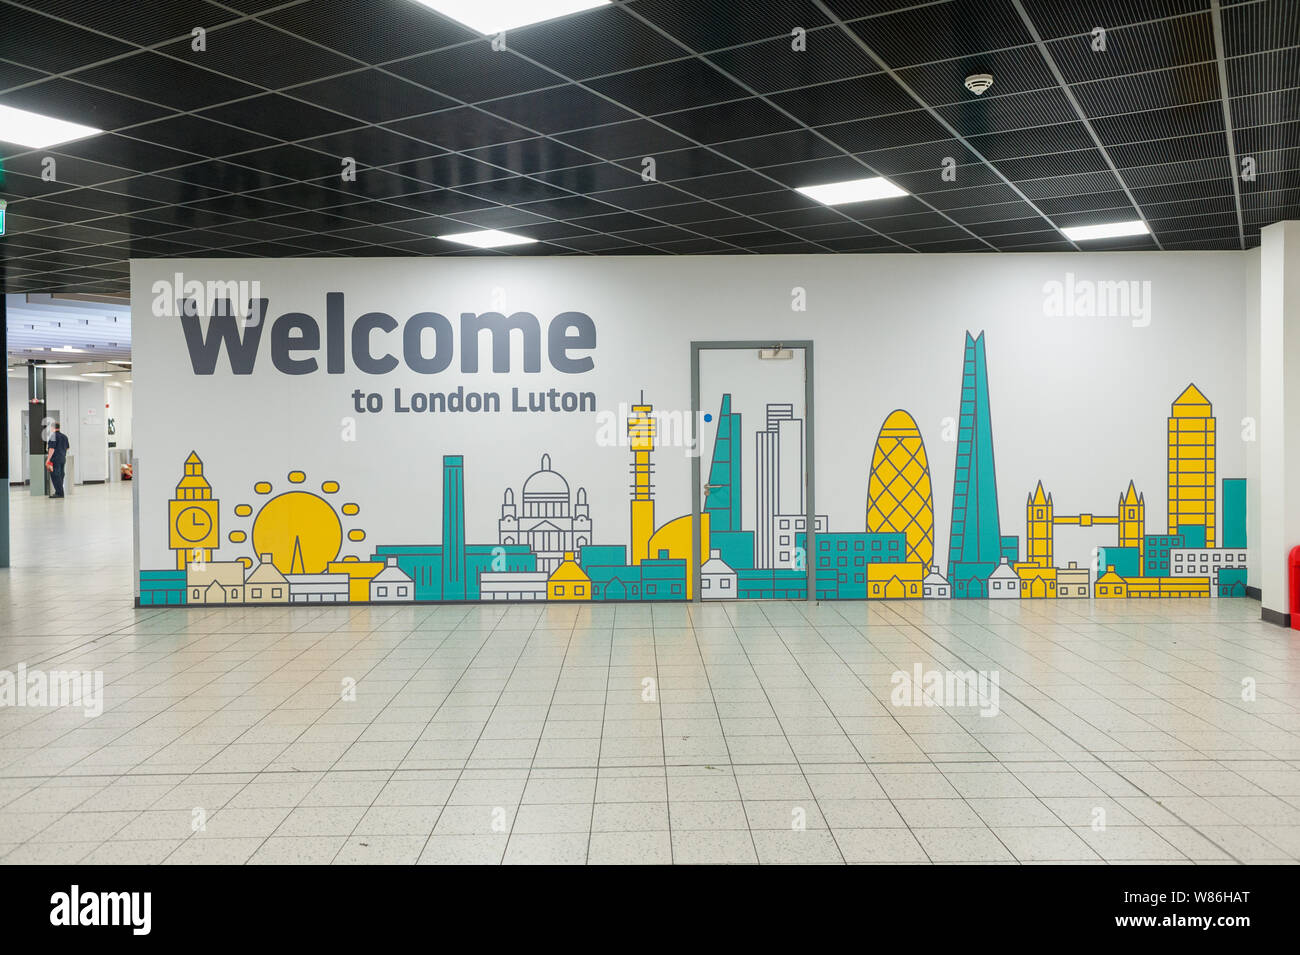 London Luton Airport arrivals welcome Stock Photo